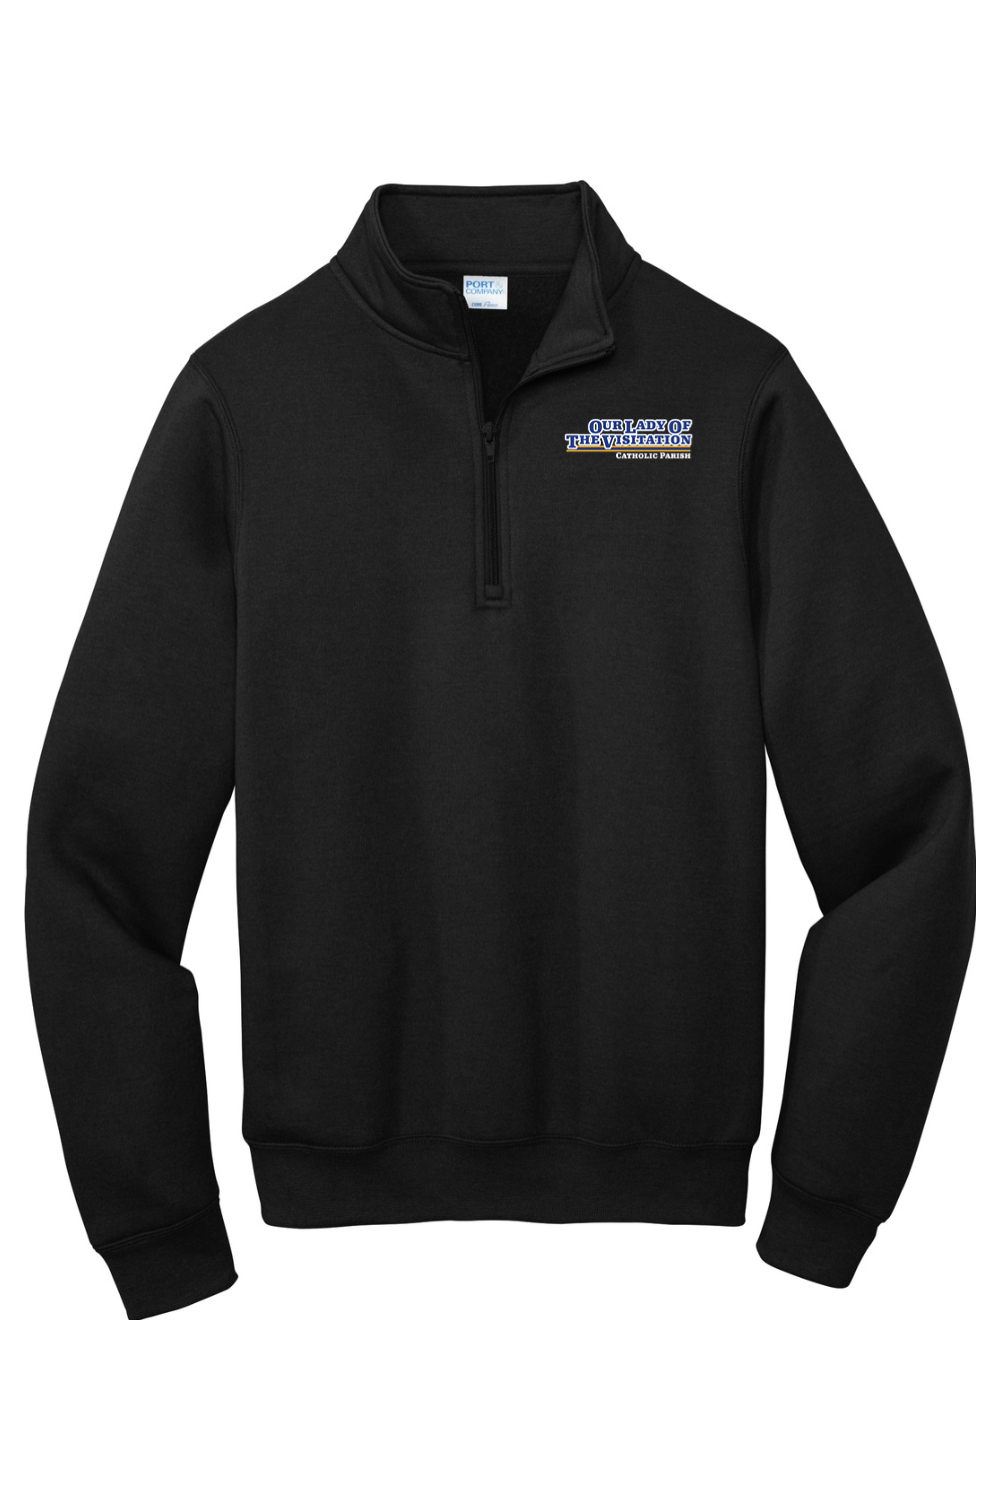 Our Lady of the Visitation Bold Left Chest Quarter Zip